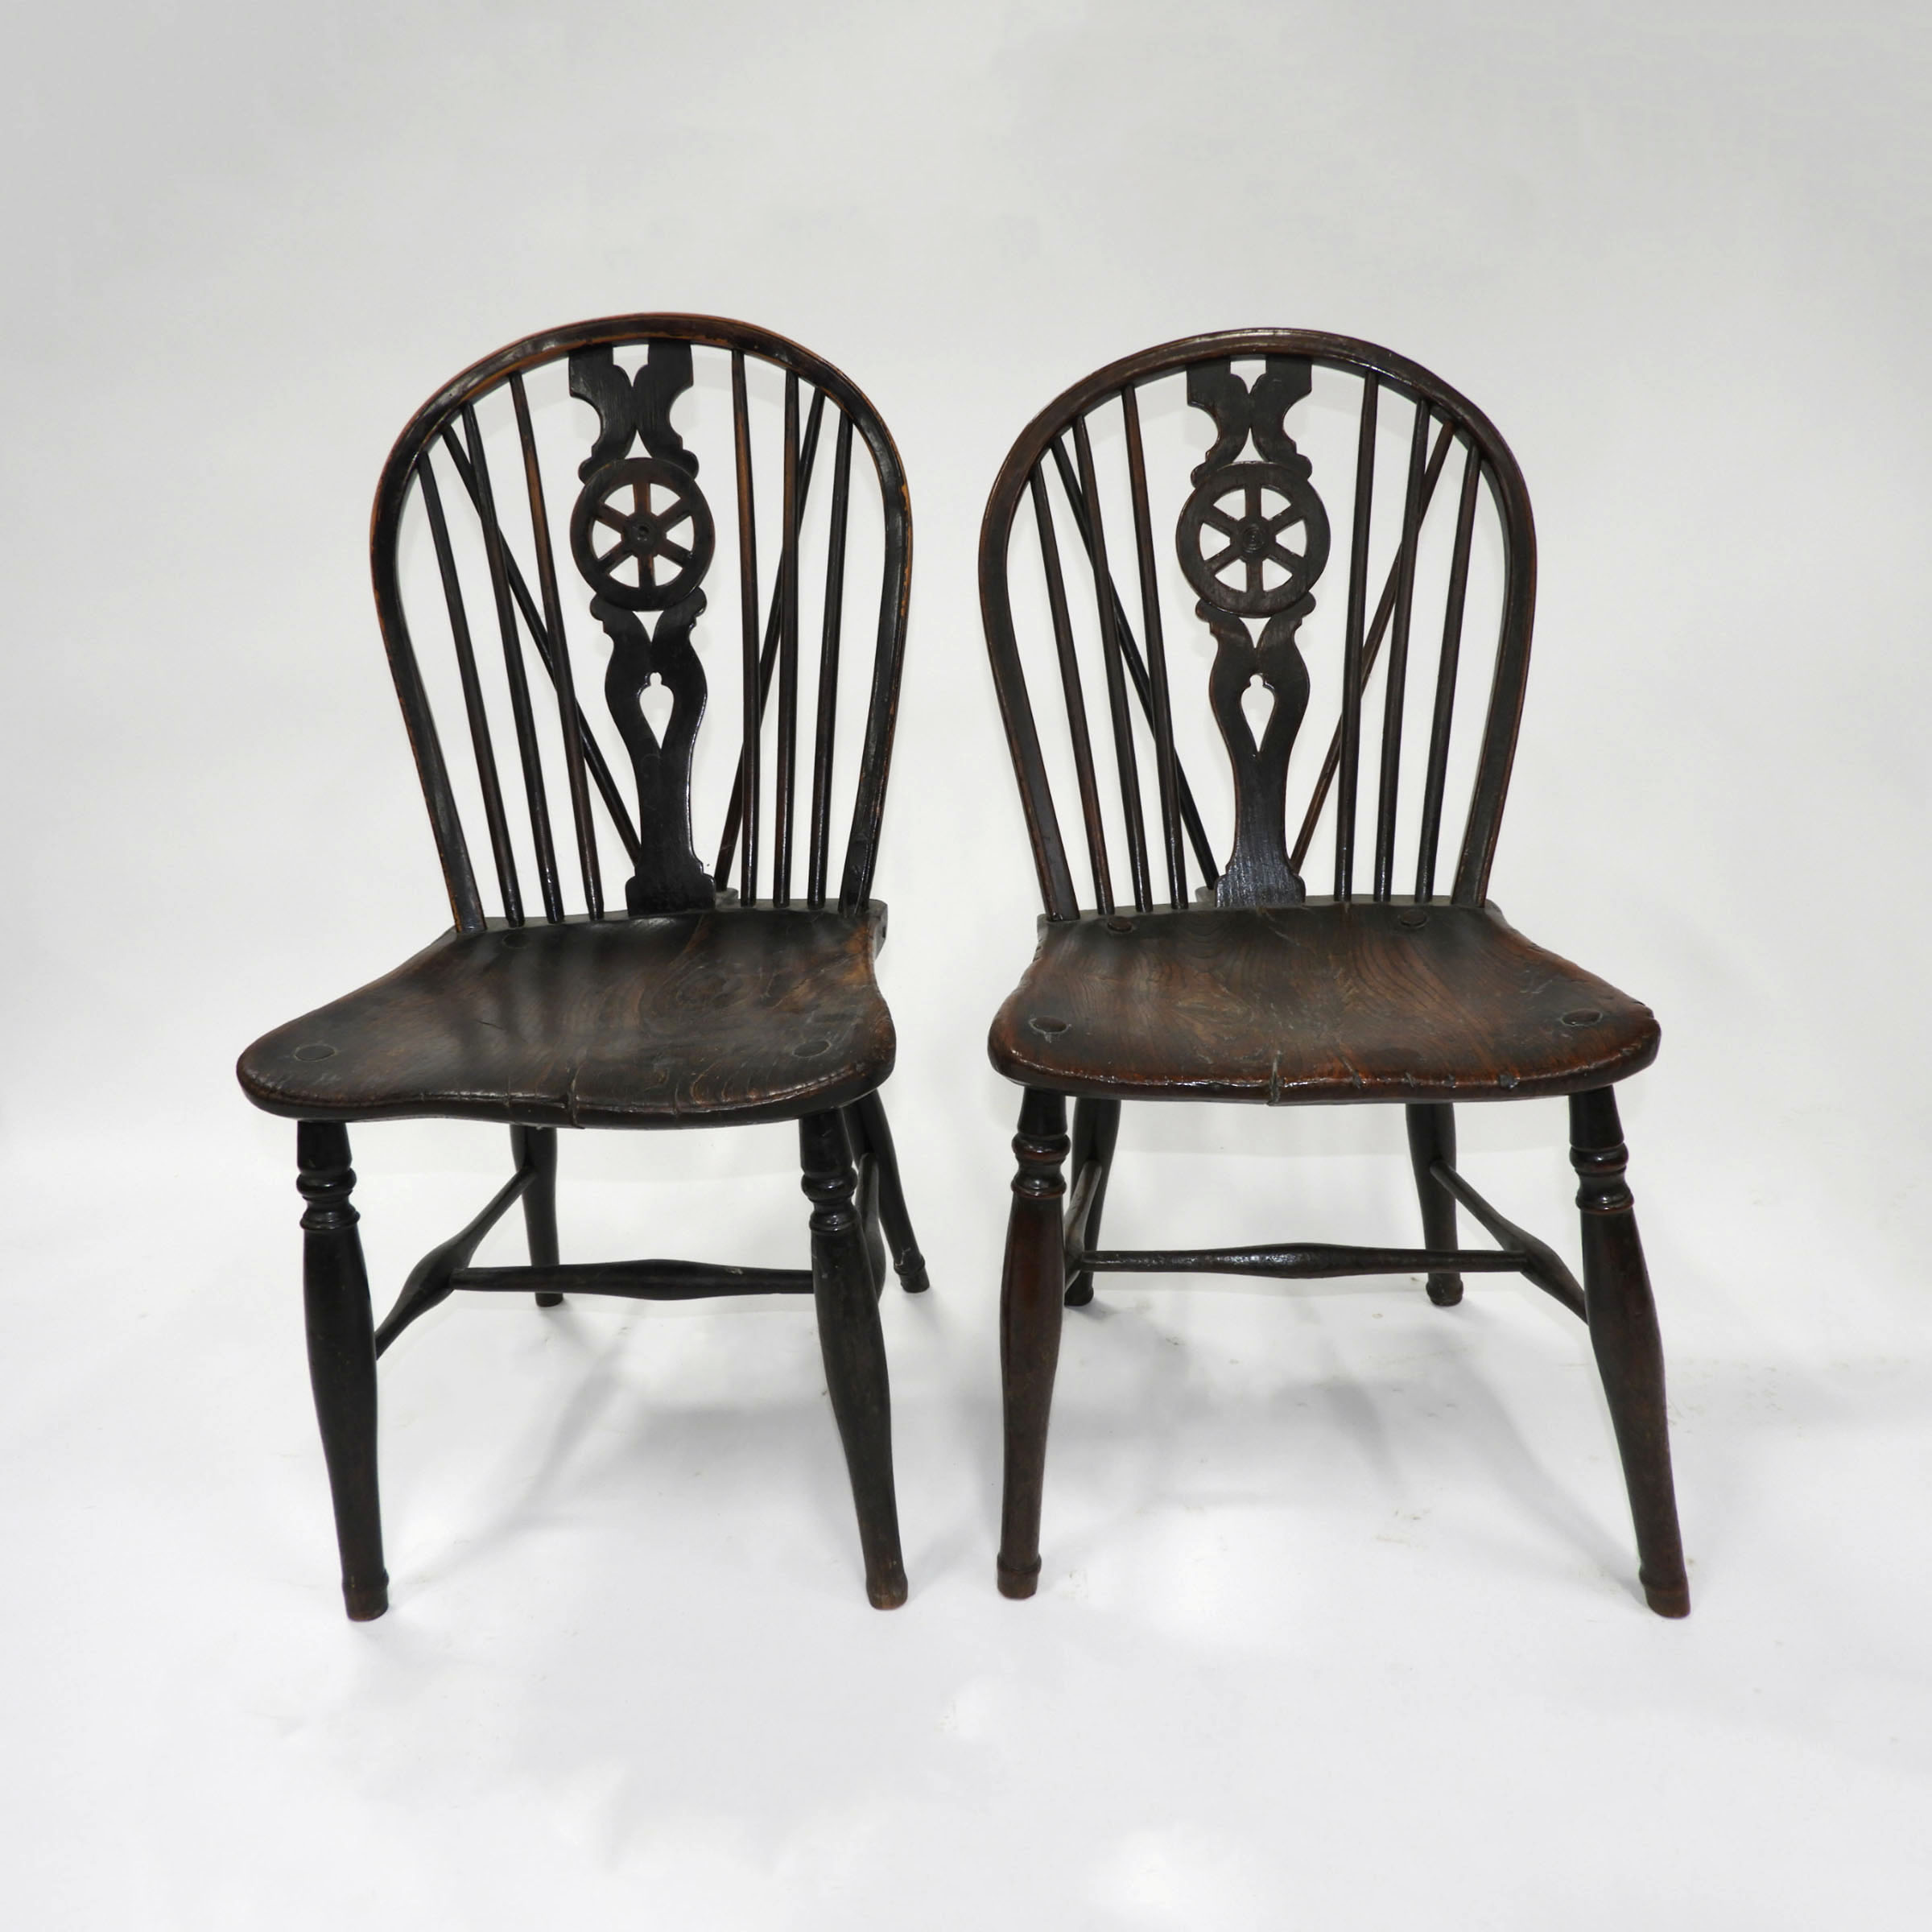 Pair of English Wheel Back Side Chairs, c.1820